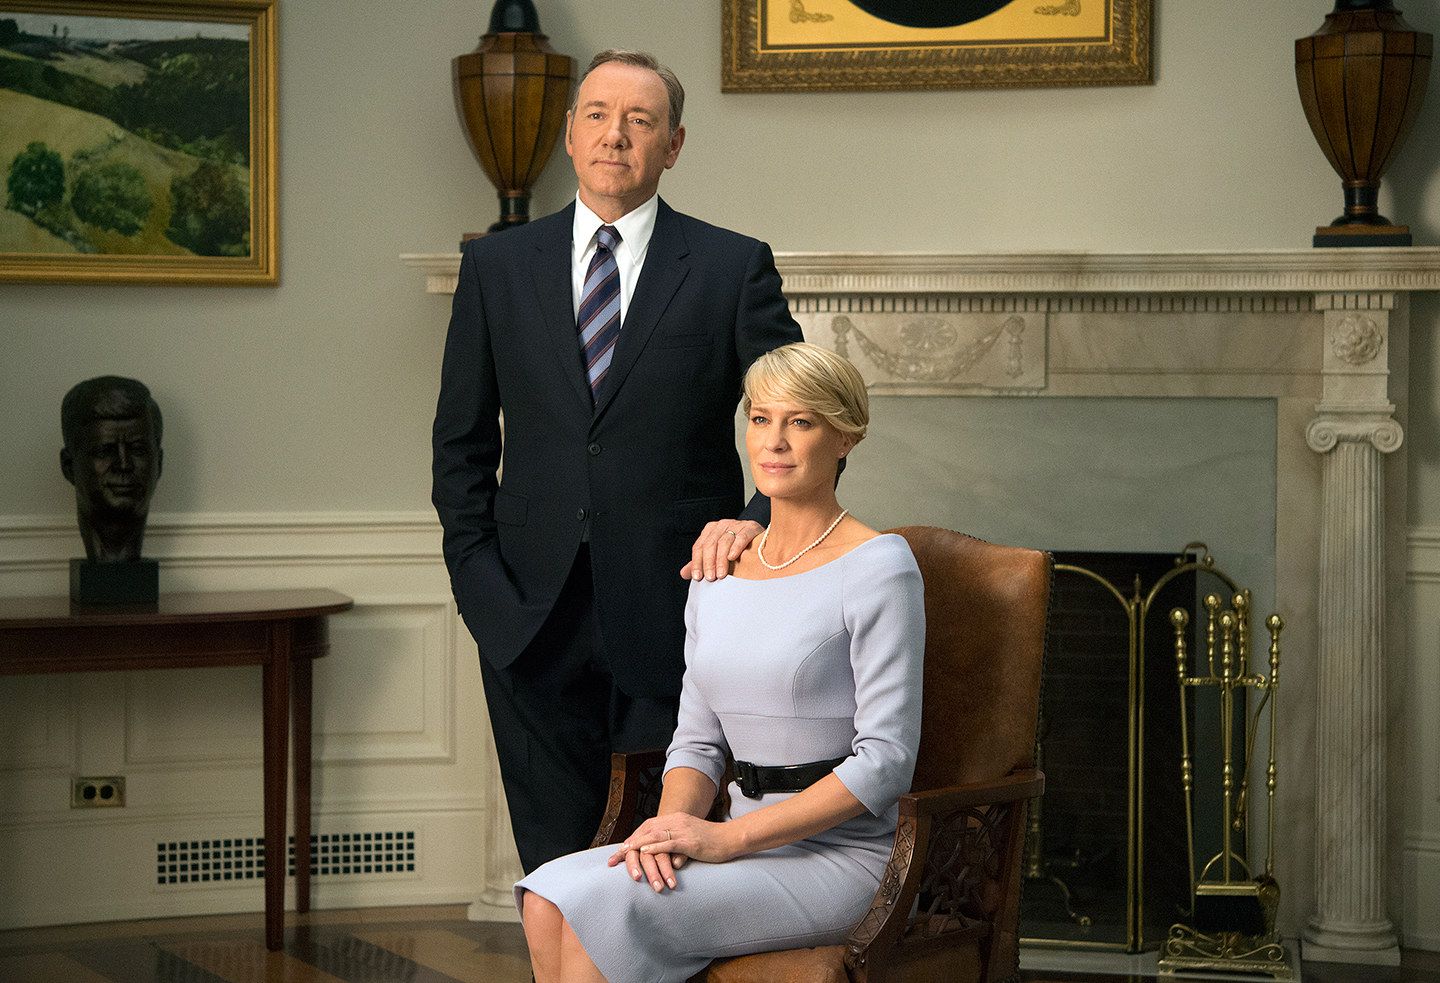 house of cards season 4 characters